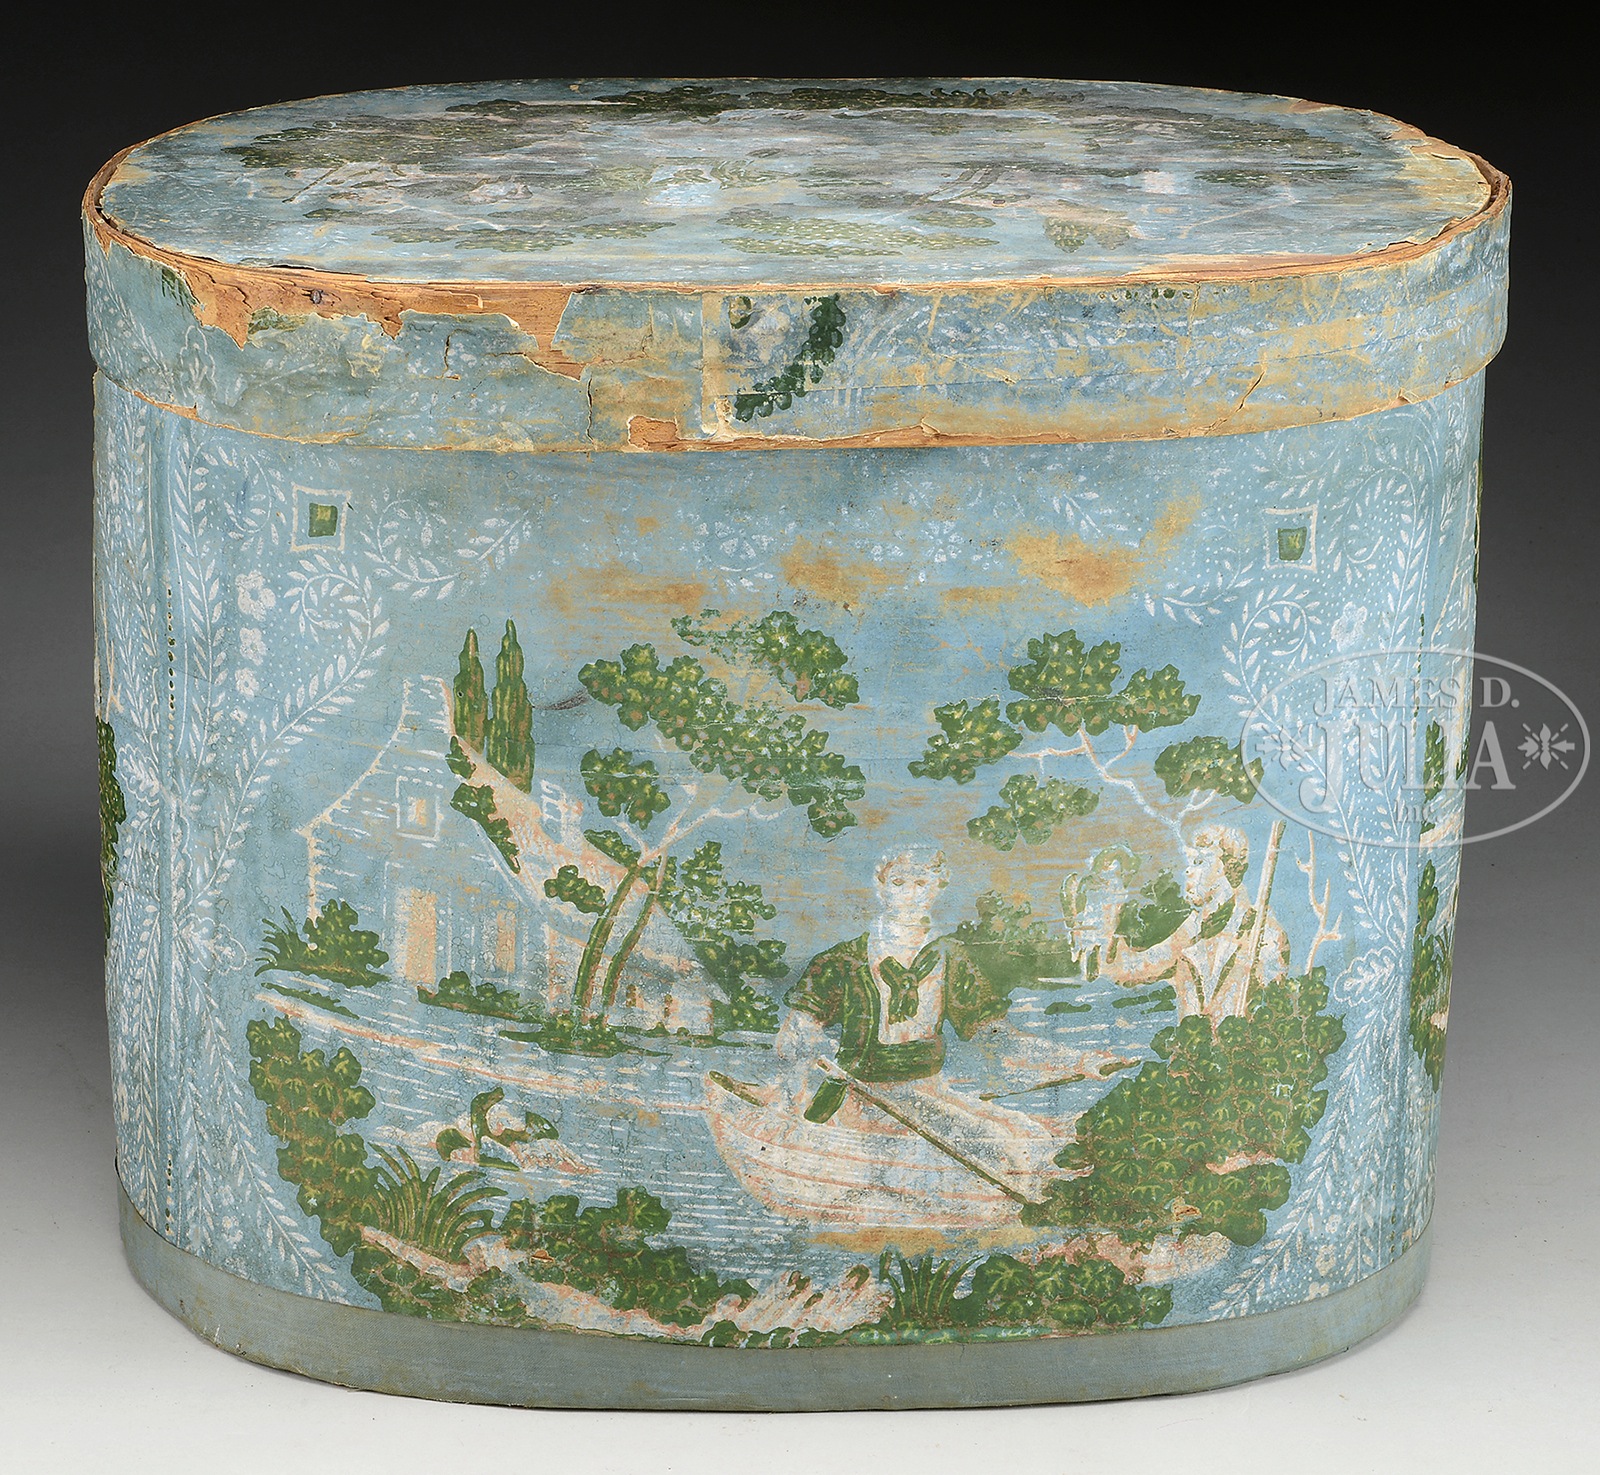 LARGE DECORATED BAND BOX BY HANNAH DAVIS, JAFFREY, NEW HAMPSHIRE. Oval box has newspaper interior of